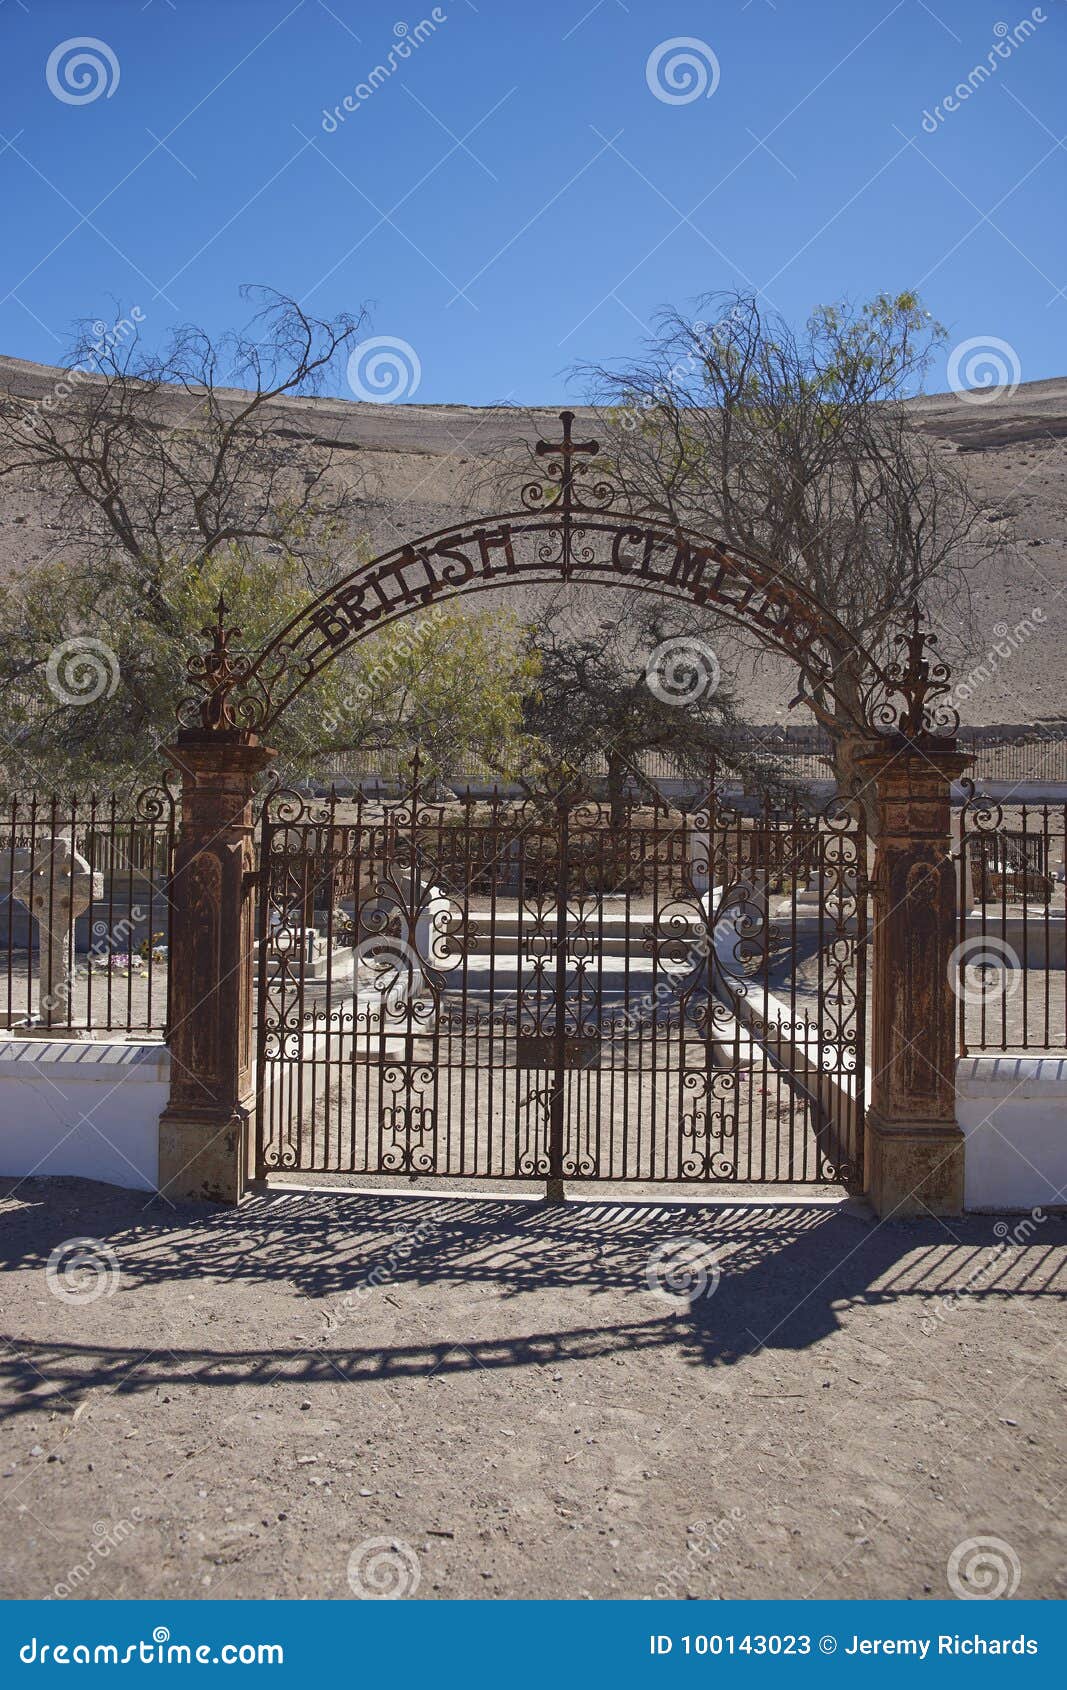 Historic Cemetery in the Atacama Desert. Historic British Cemetery from the era of nitrate mining in the Atacama Desert, in the grounds of Hacienda Tiliviche in northern Chile.